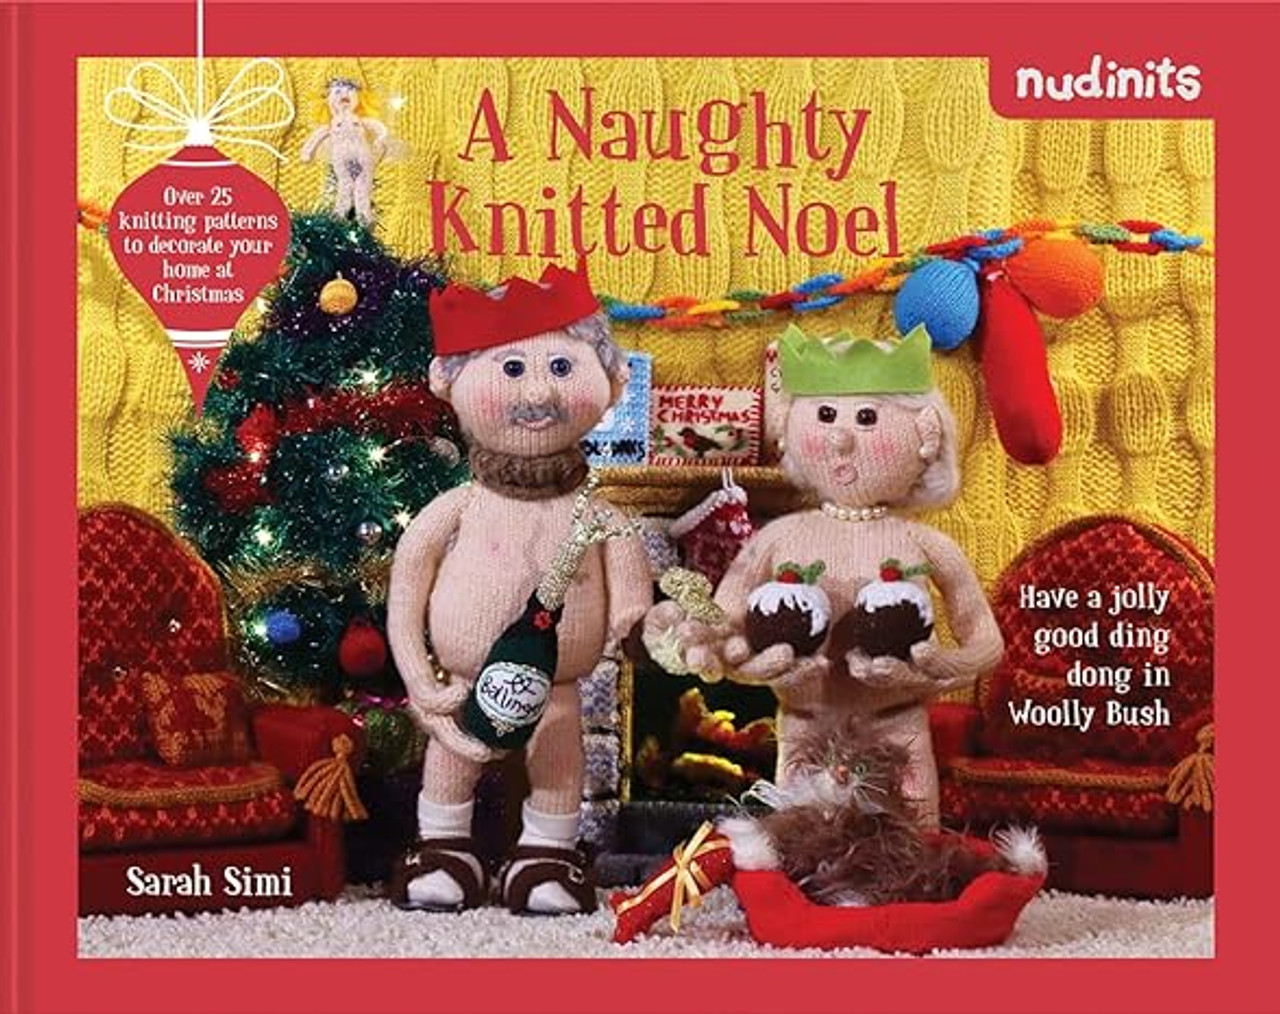 Nudinits - A Naughty Knitted Noel! Over 25 knitting patterns to decorate your home at Christmas